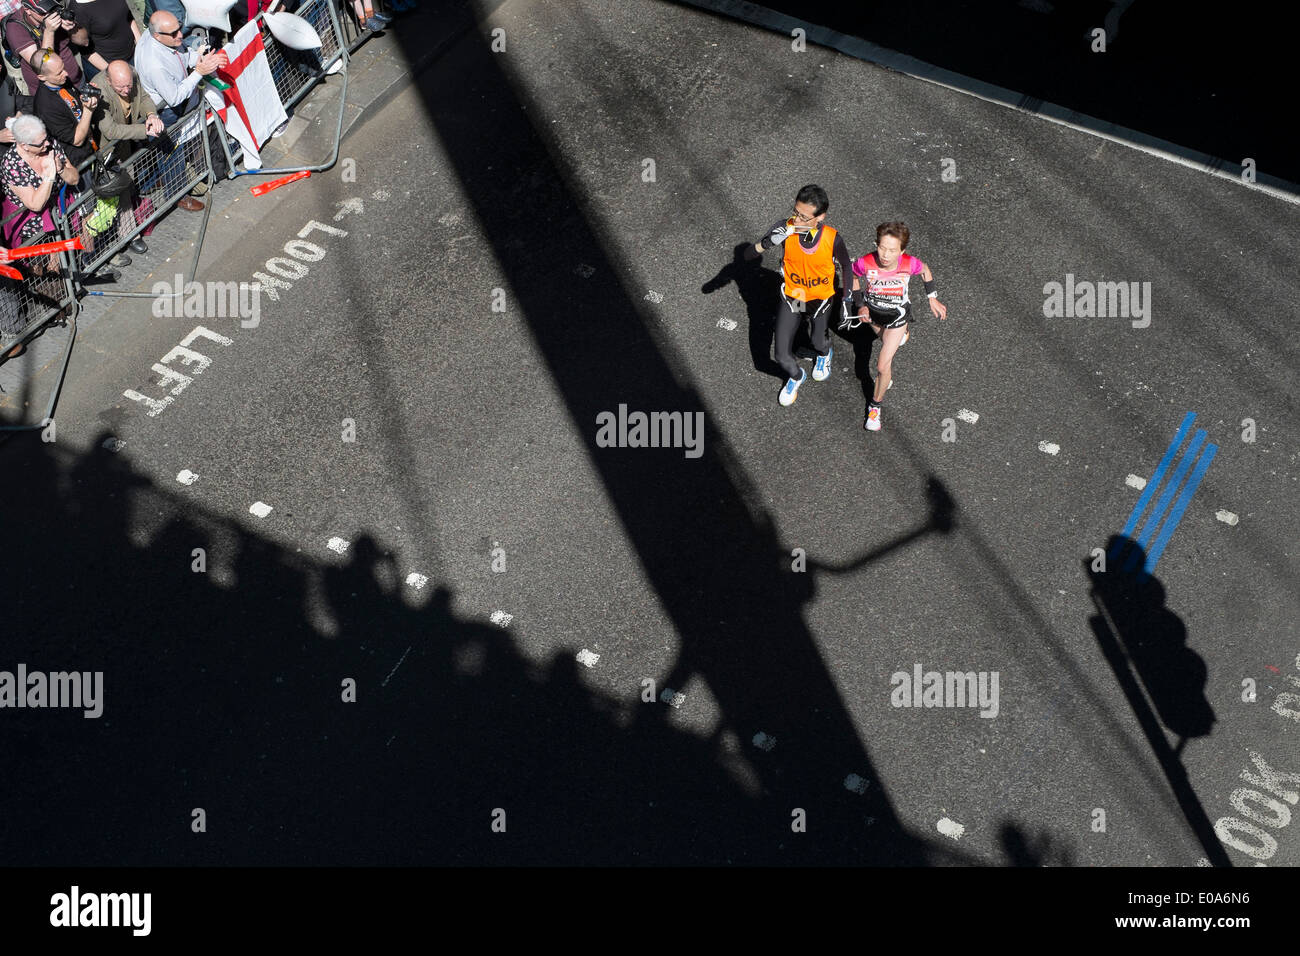 Competitors in the 2014 London Marathon. Visually impaired runner and guide. Stock Photo